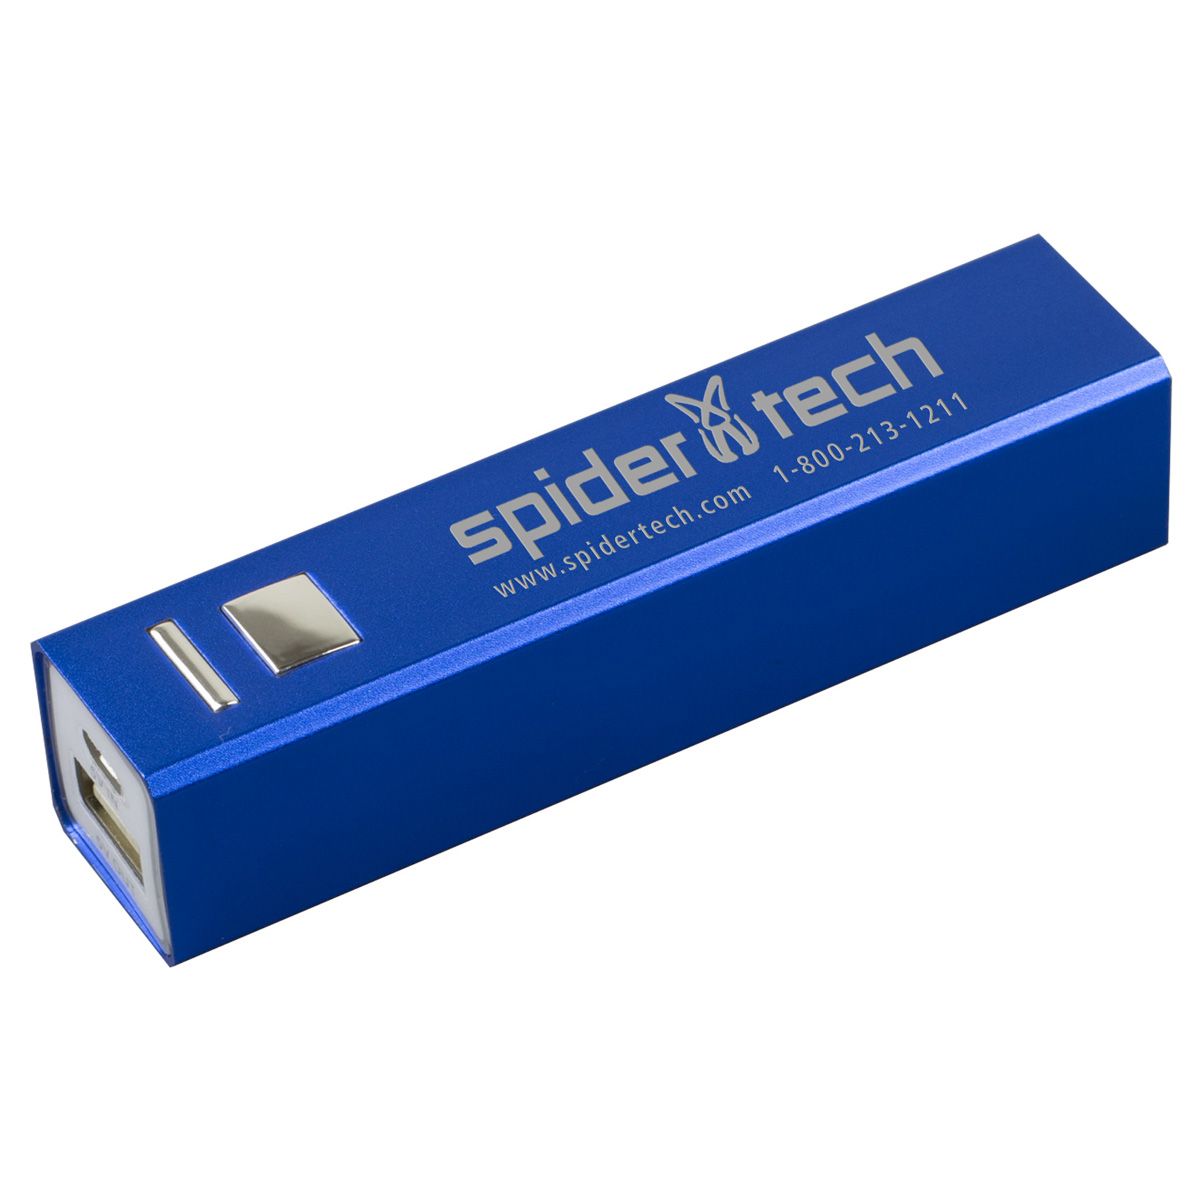 blue, rectangular, power bank with the words "spider tech" in silver